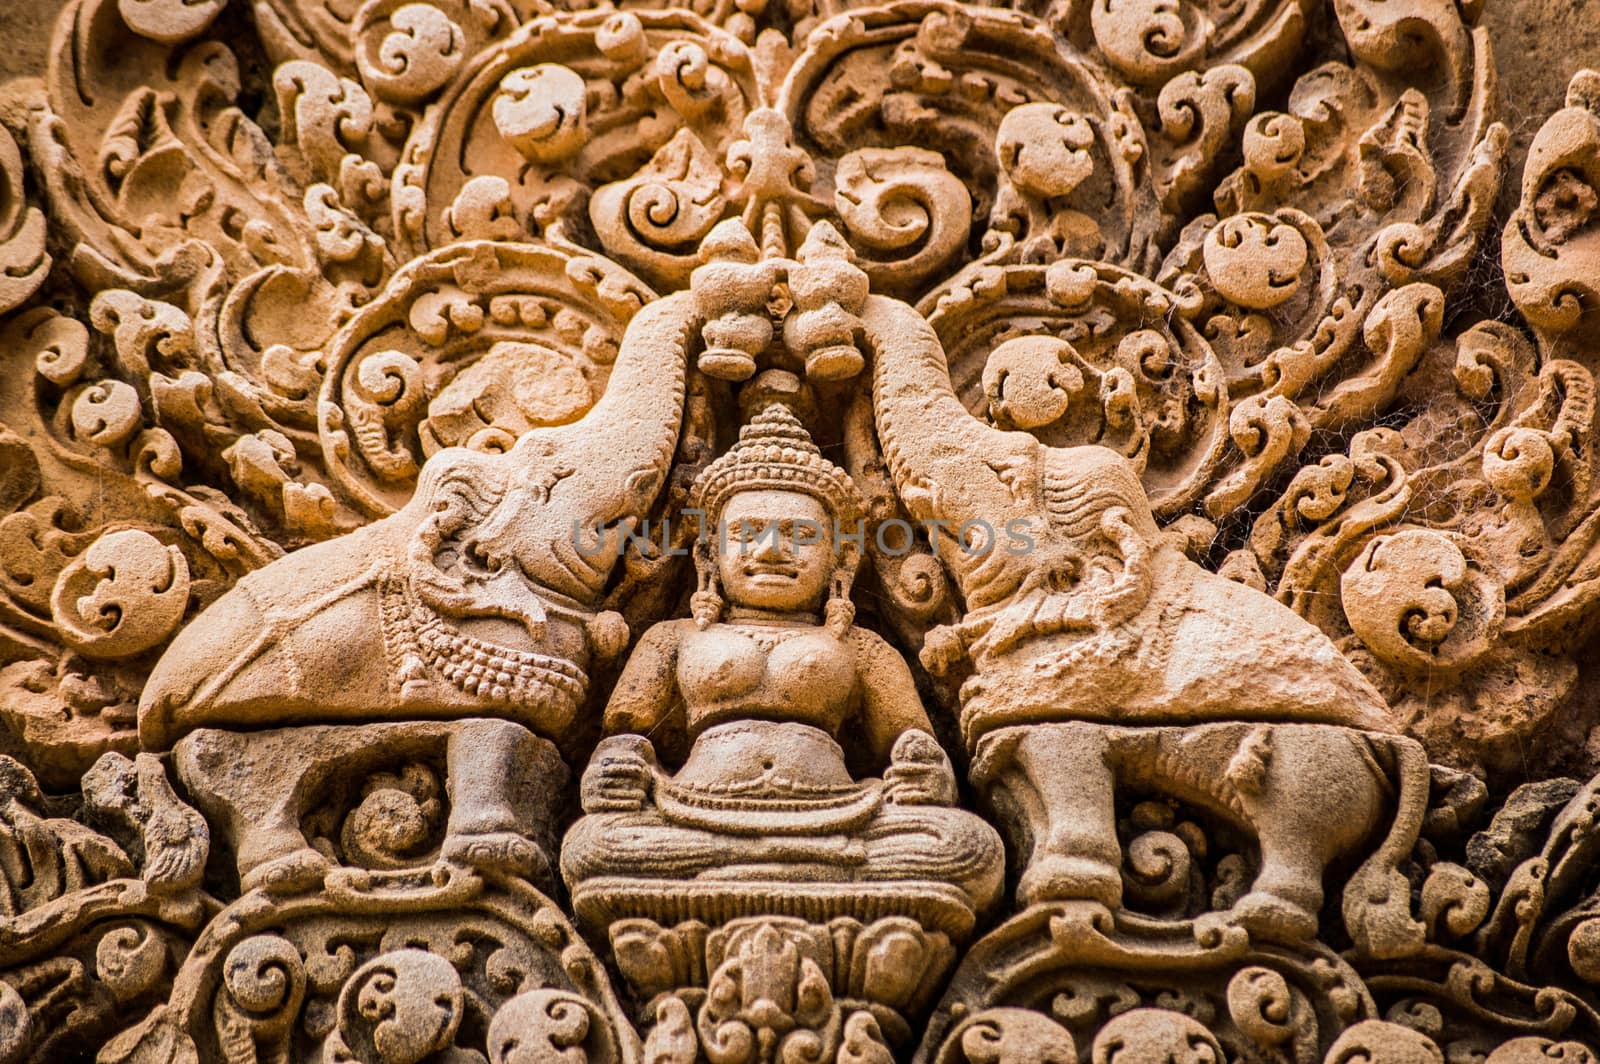 Ornate bas relief carving of the Hindu god Indra surrounded by elephants. Red sandstone lintel at the ancient Banteay Srei Temple, Angkor, Cambodia.